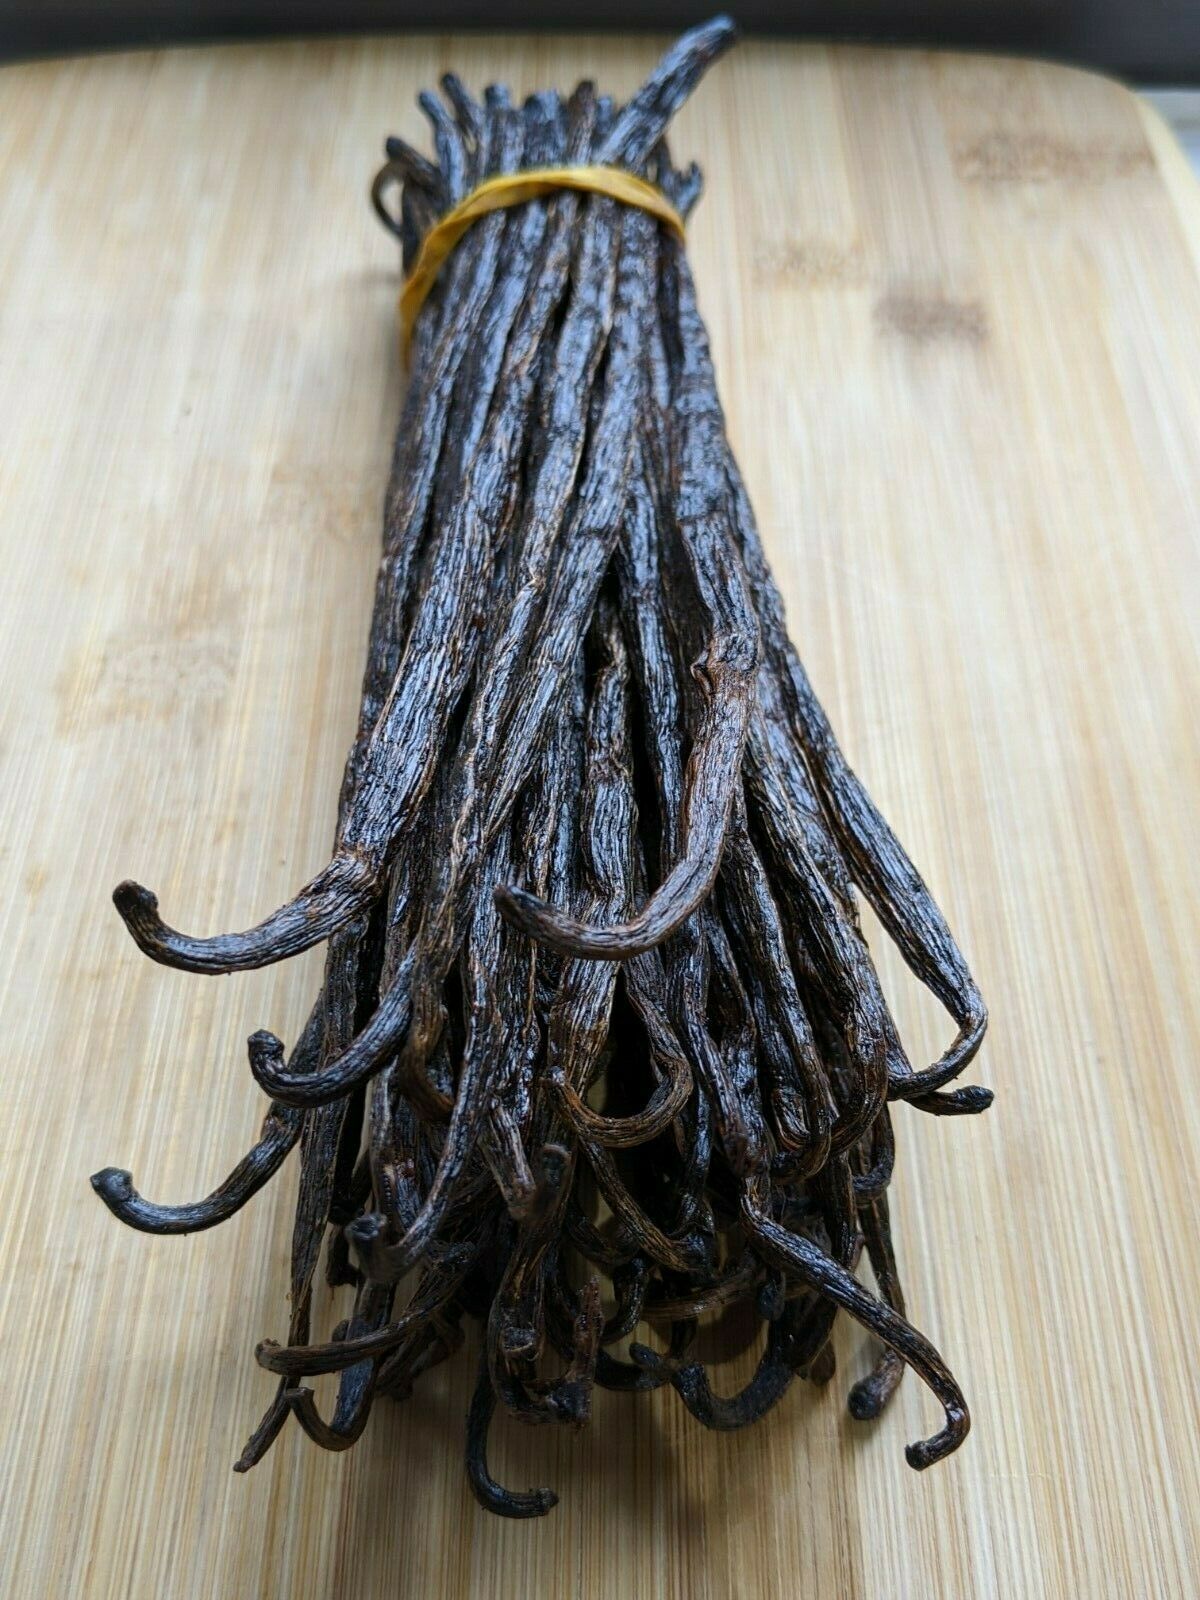 Primary image for 10 Madagascar Organic Vanilla Beans Grade A/B - Great for Extraction & Baking!